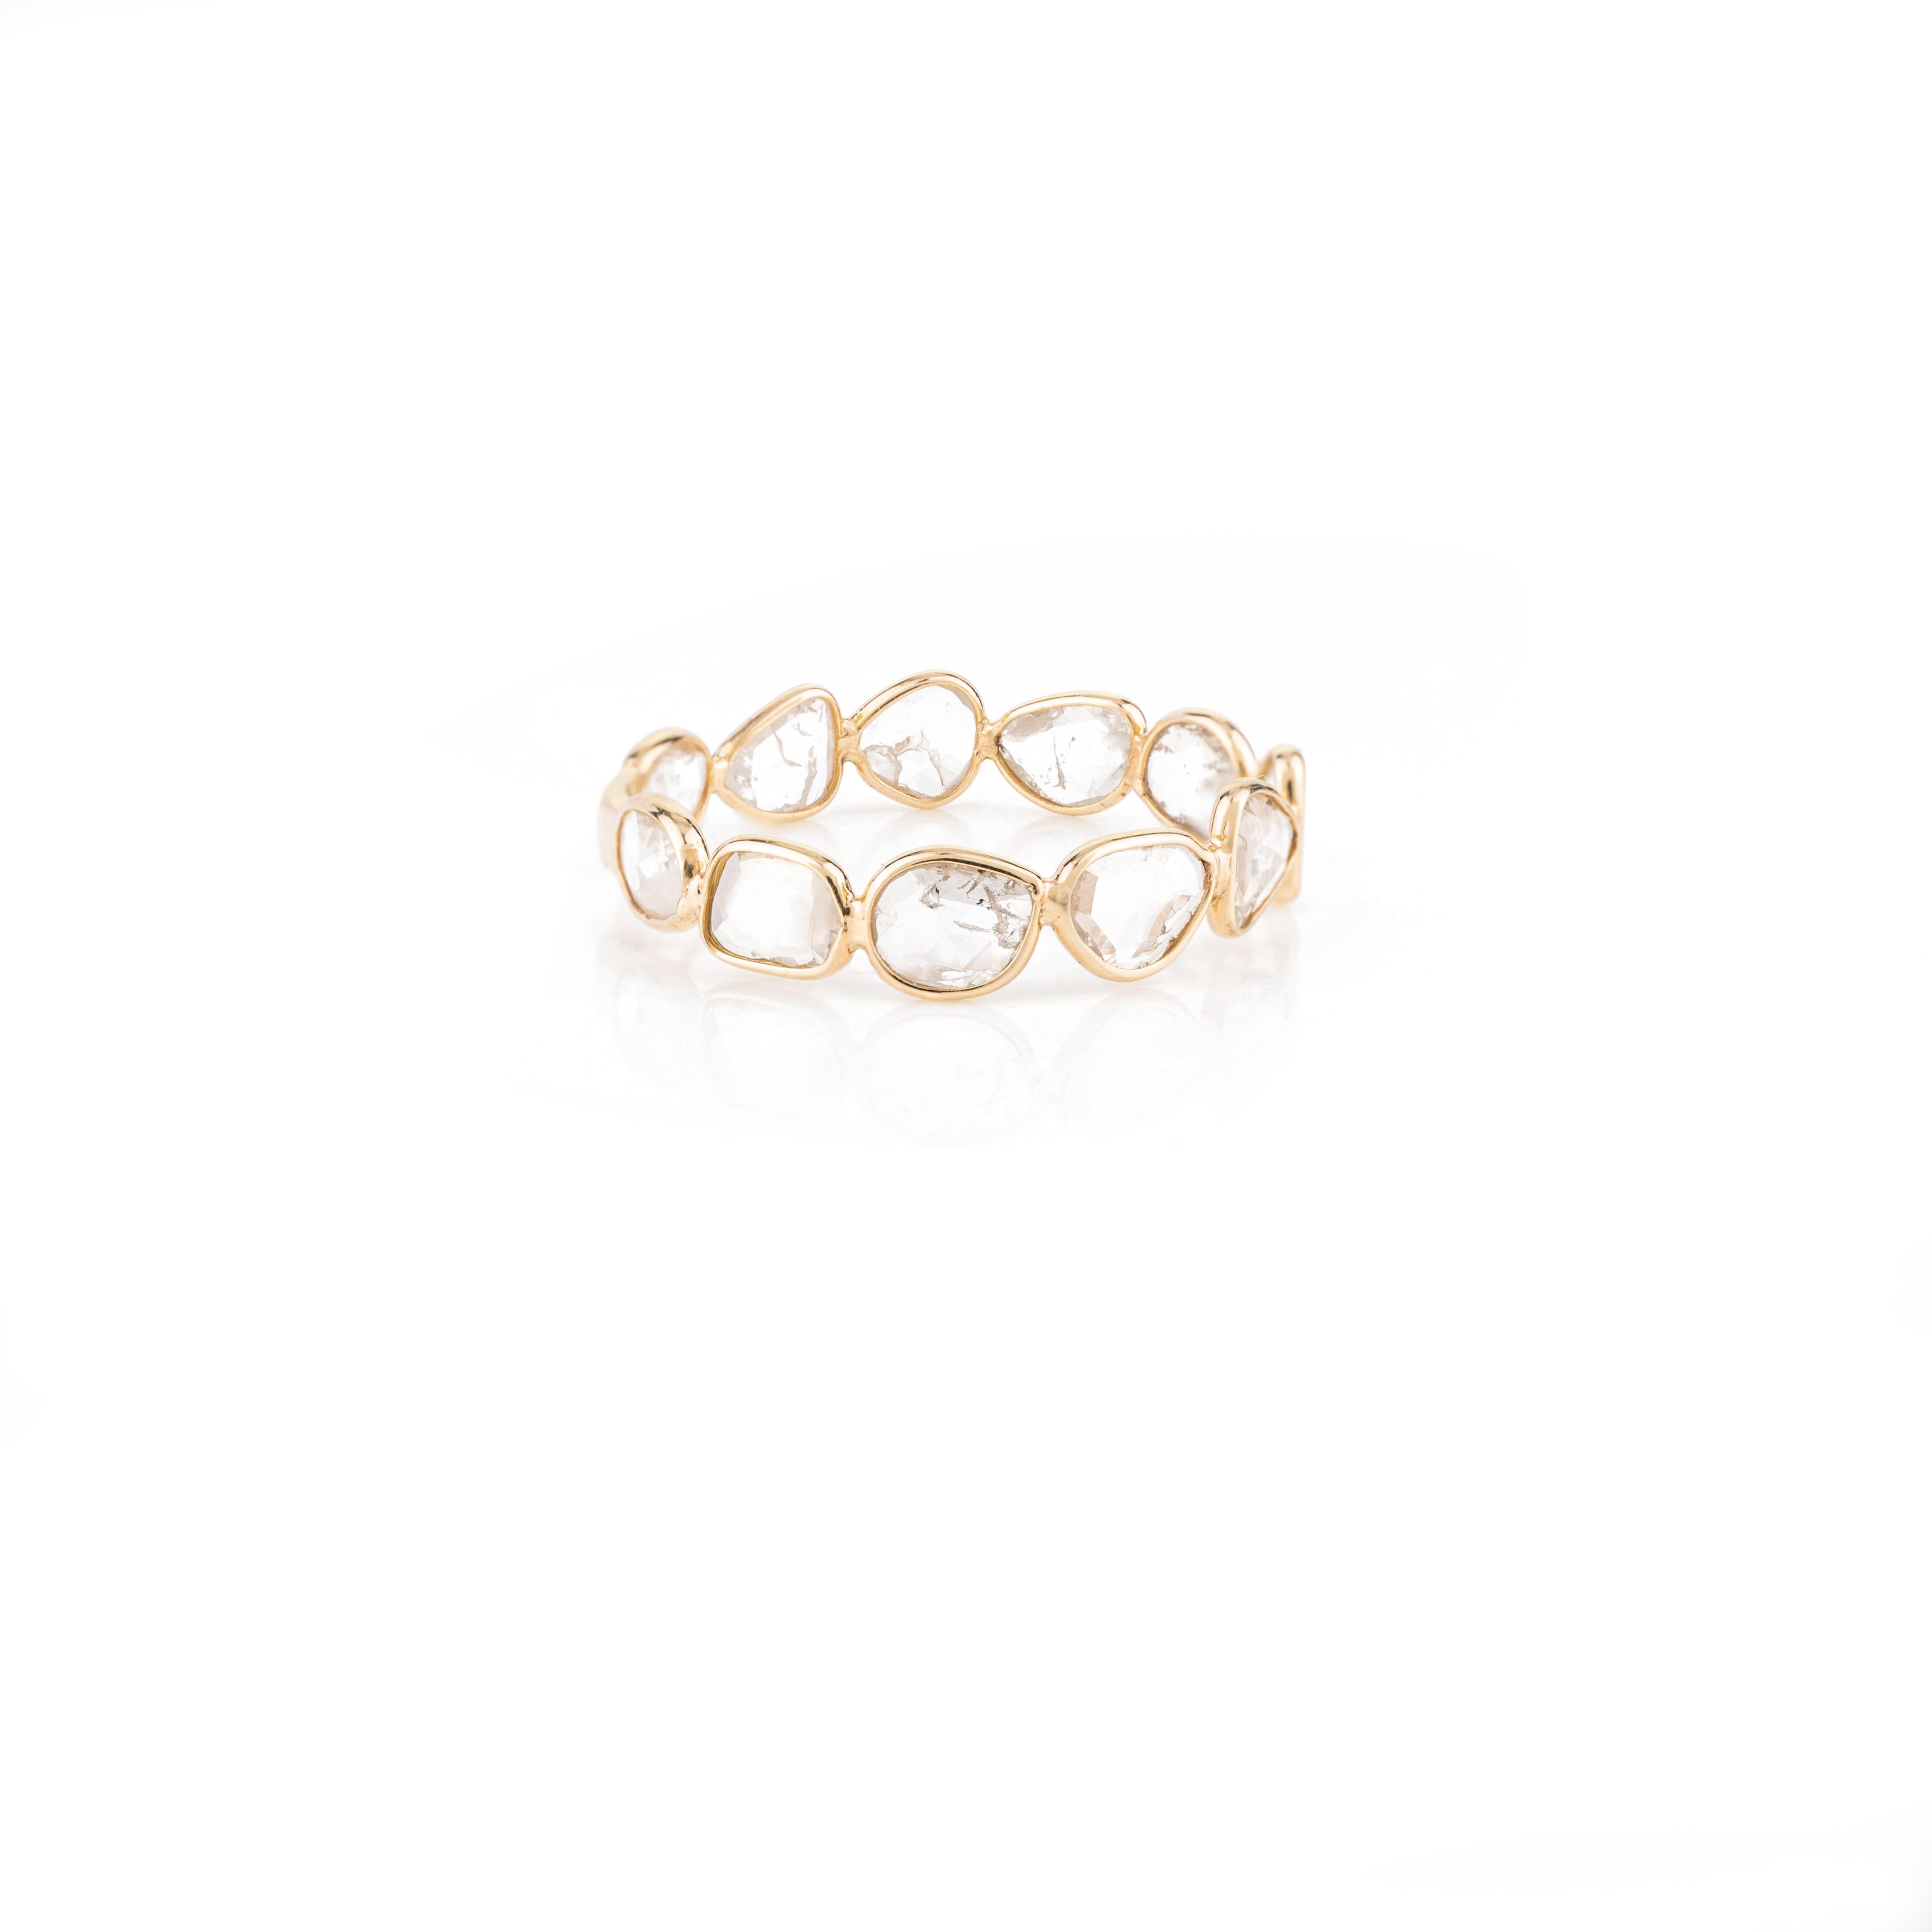 For Sale:  Natural Uncut Diamond 18k Yellow Gold Stacking Band Ring Gift for Her 3